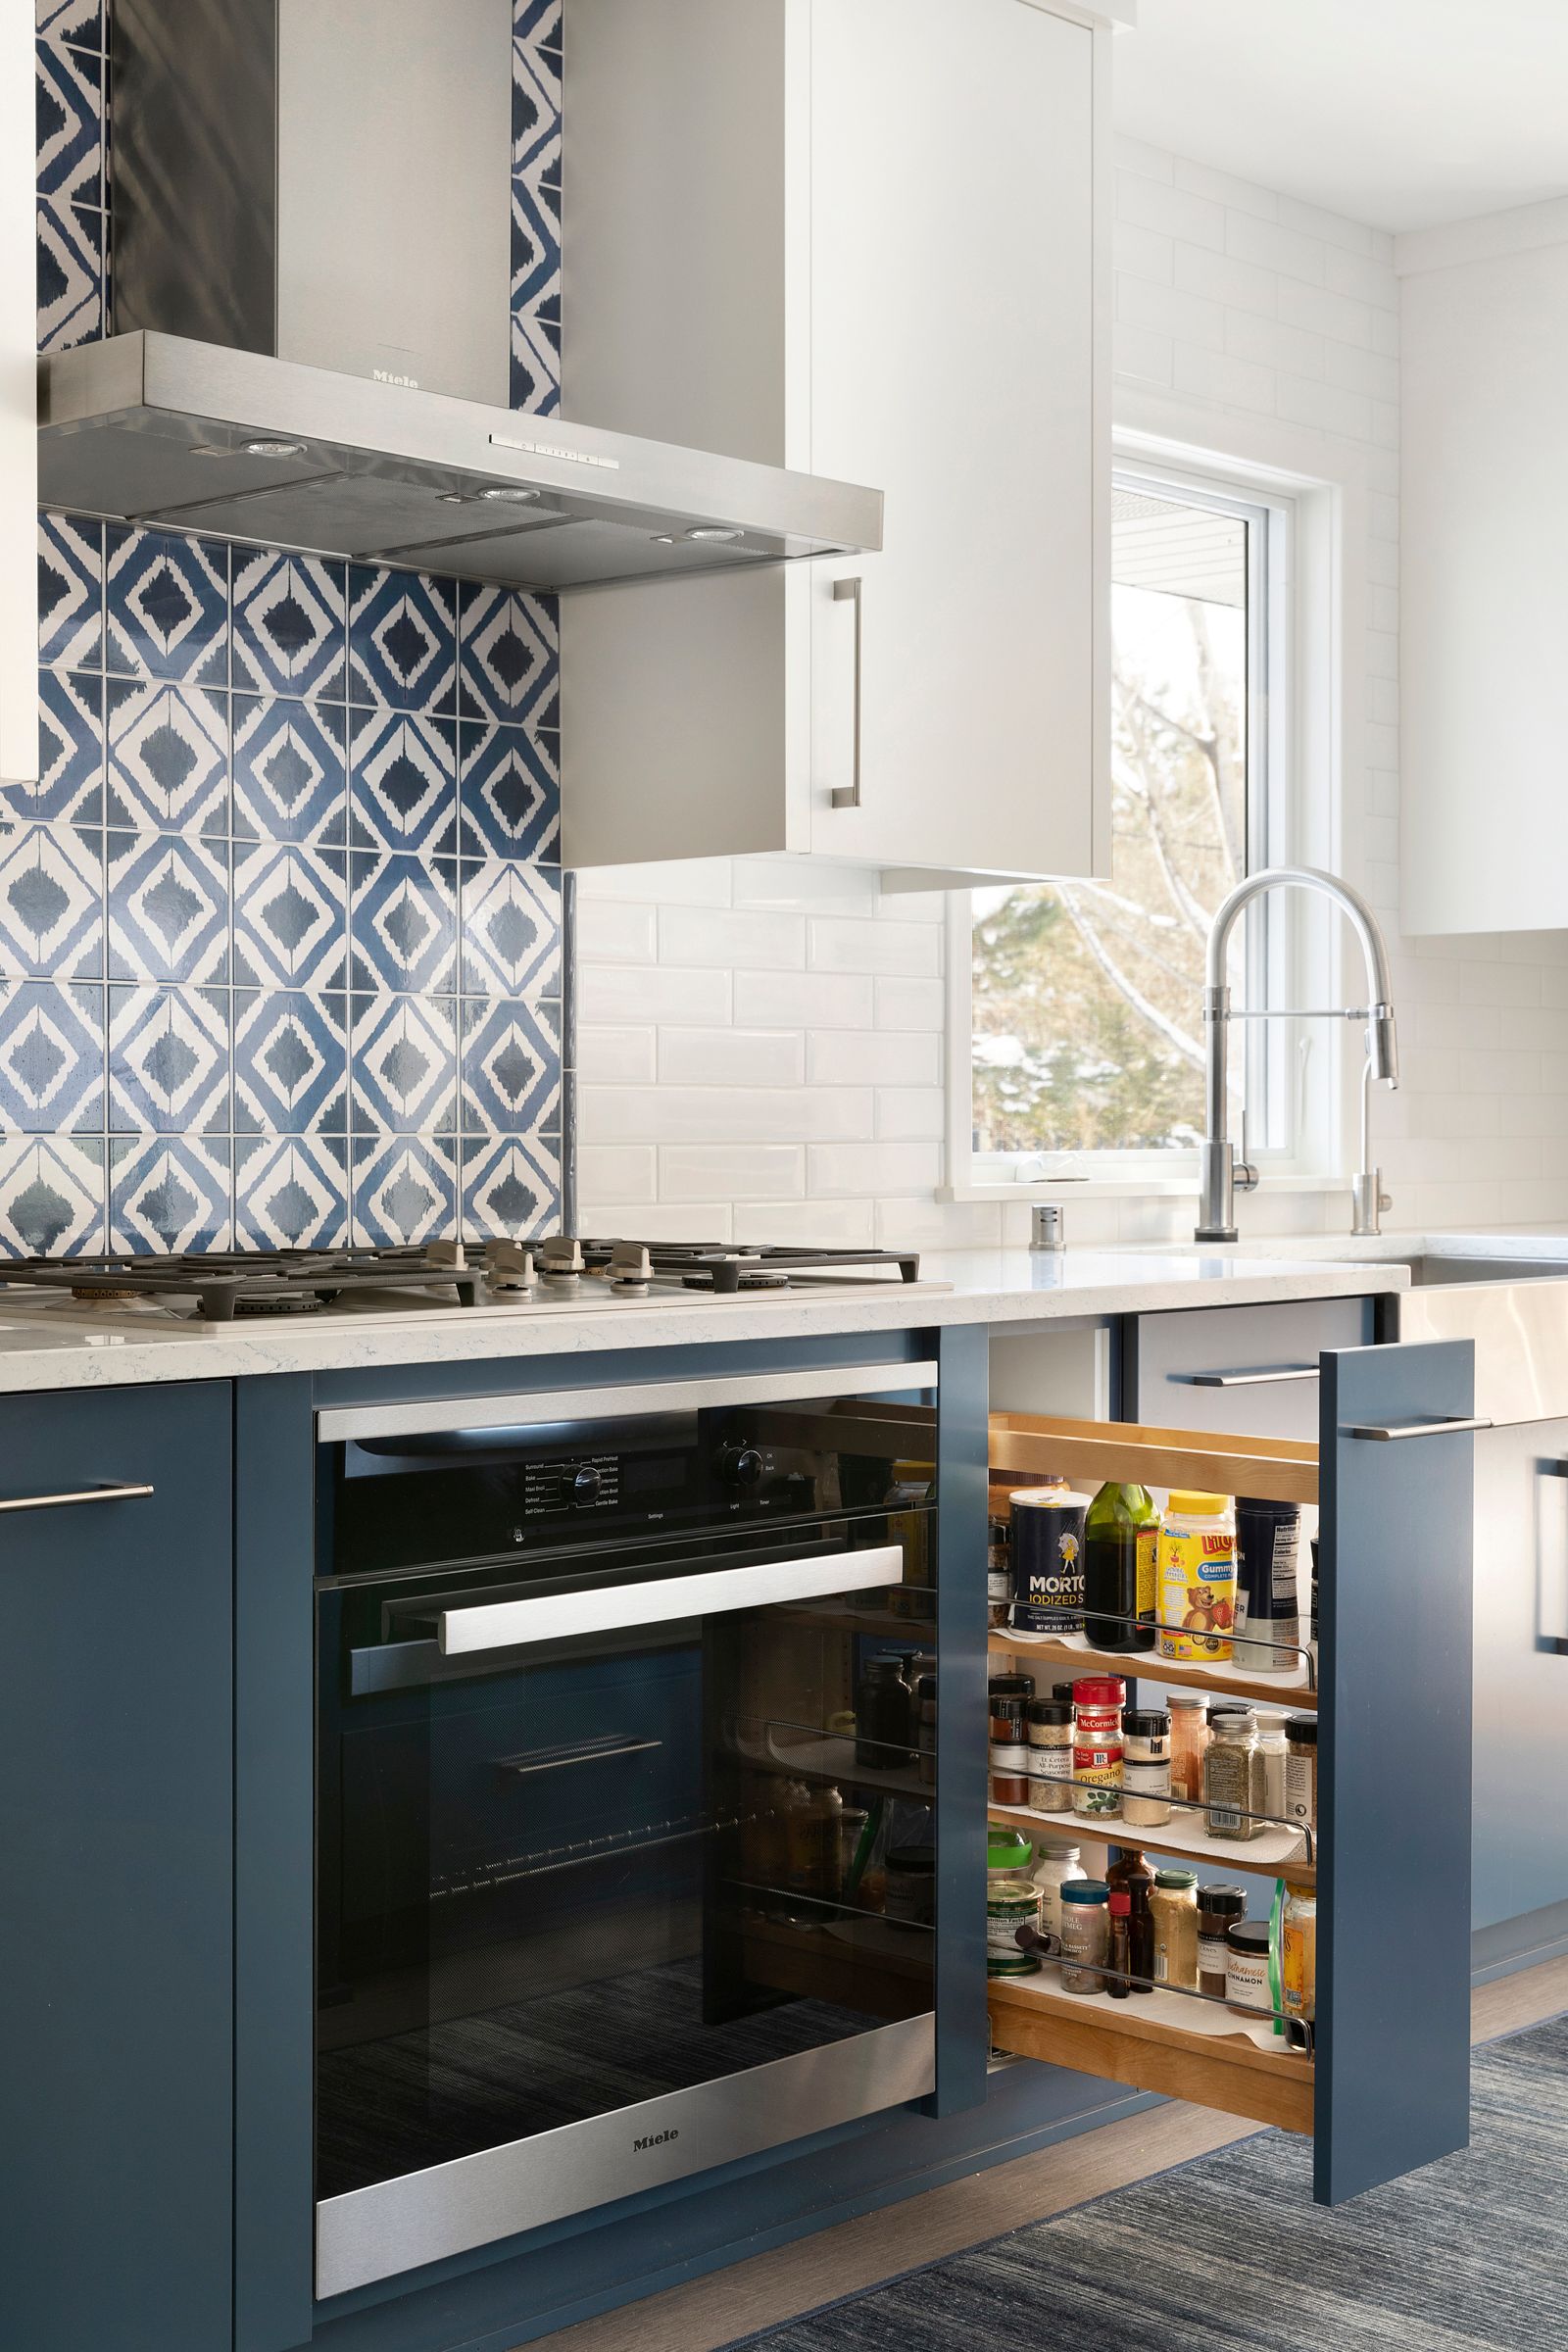 Minneapolis kitchen remodel with white and blue custom cabinets and pullout drawer.